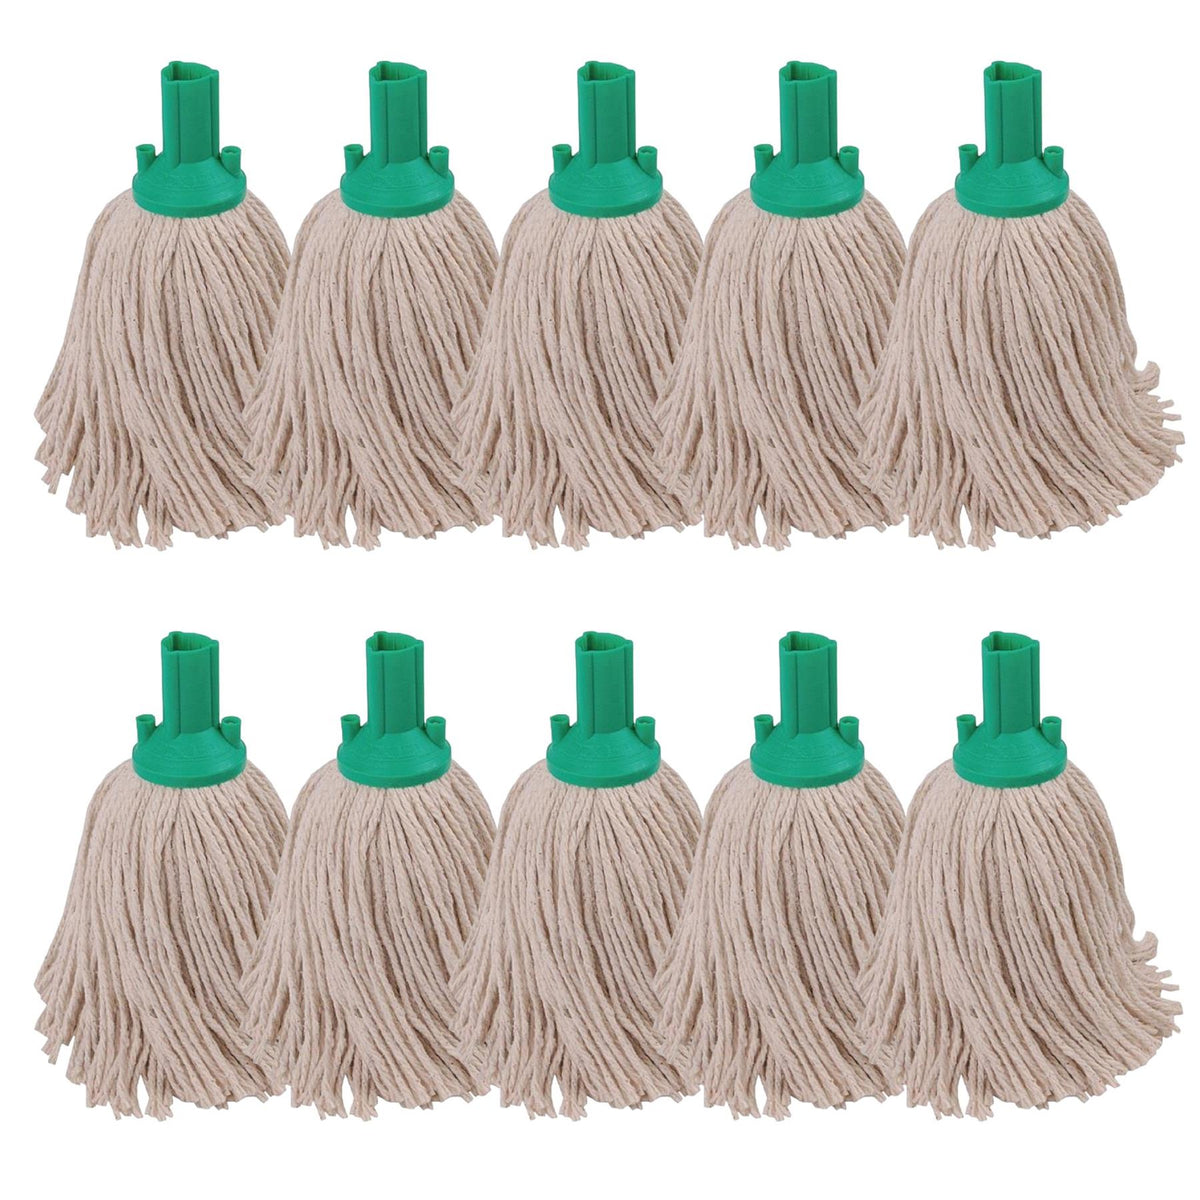 Exel Cotton Mop Heads 250 grams Pack of 10 Green